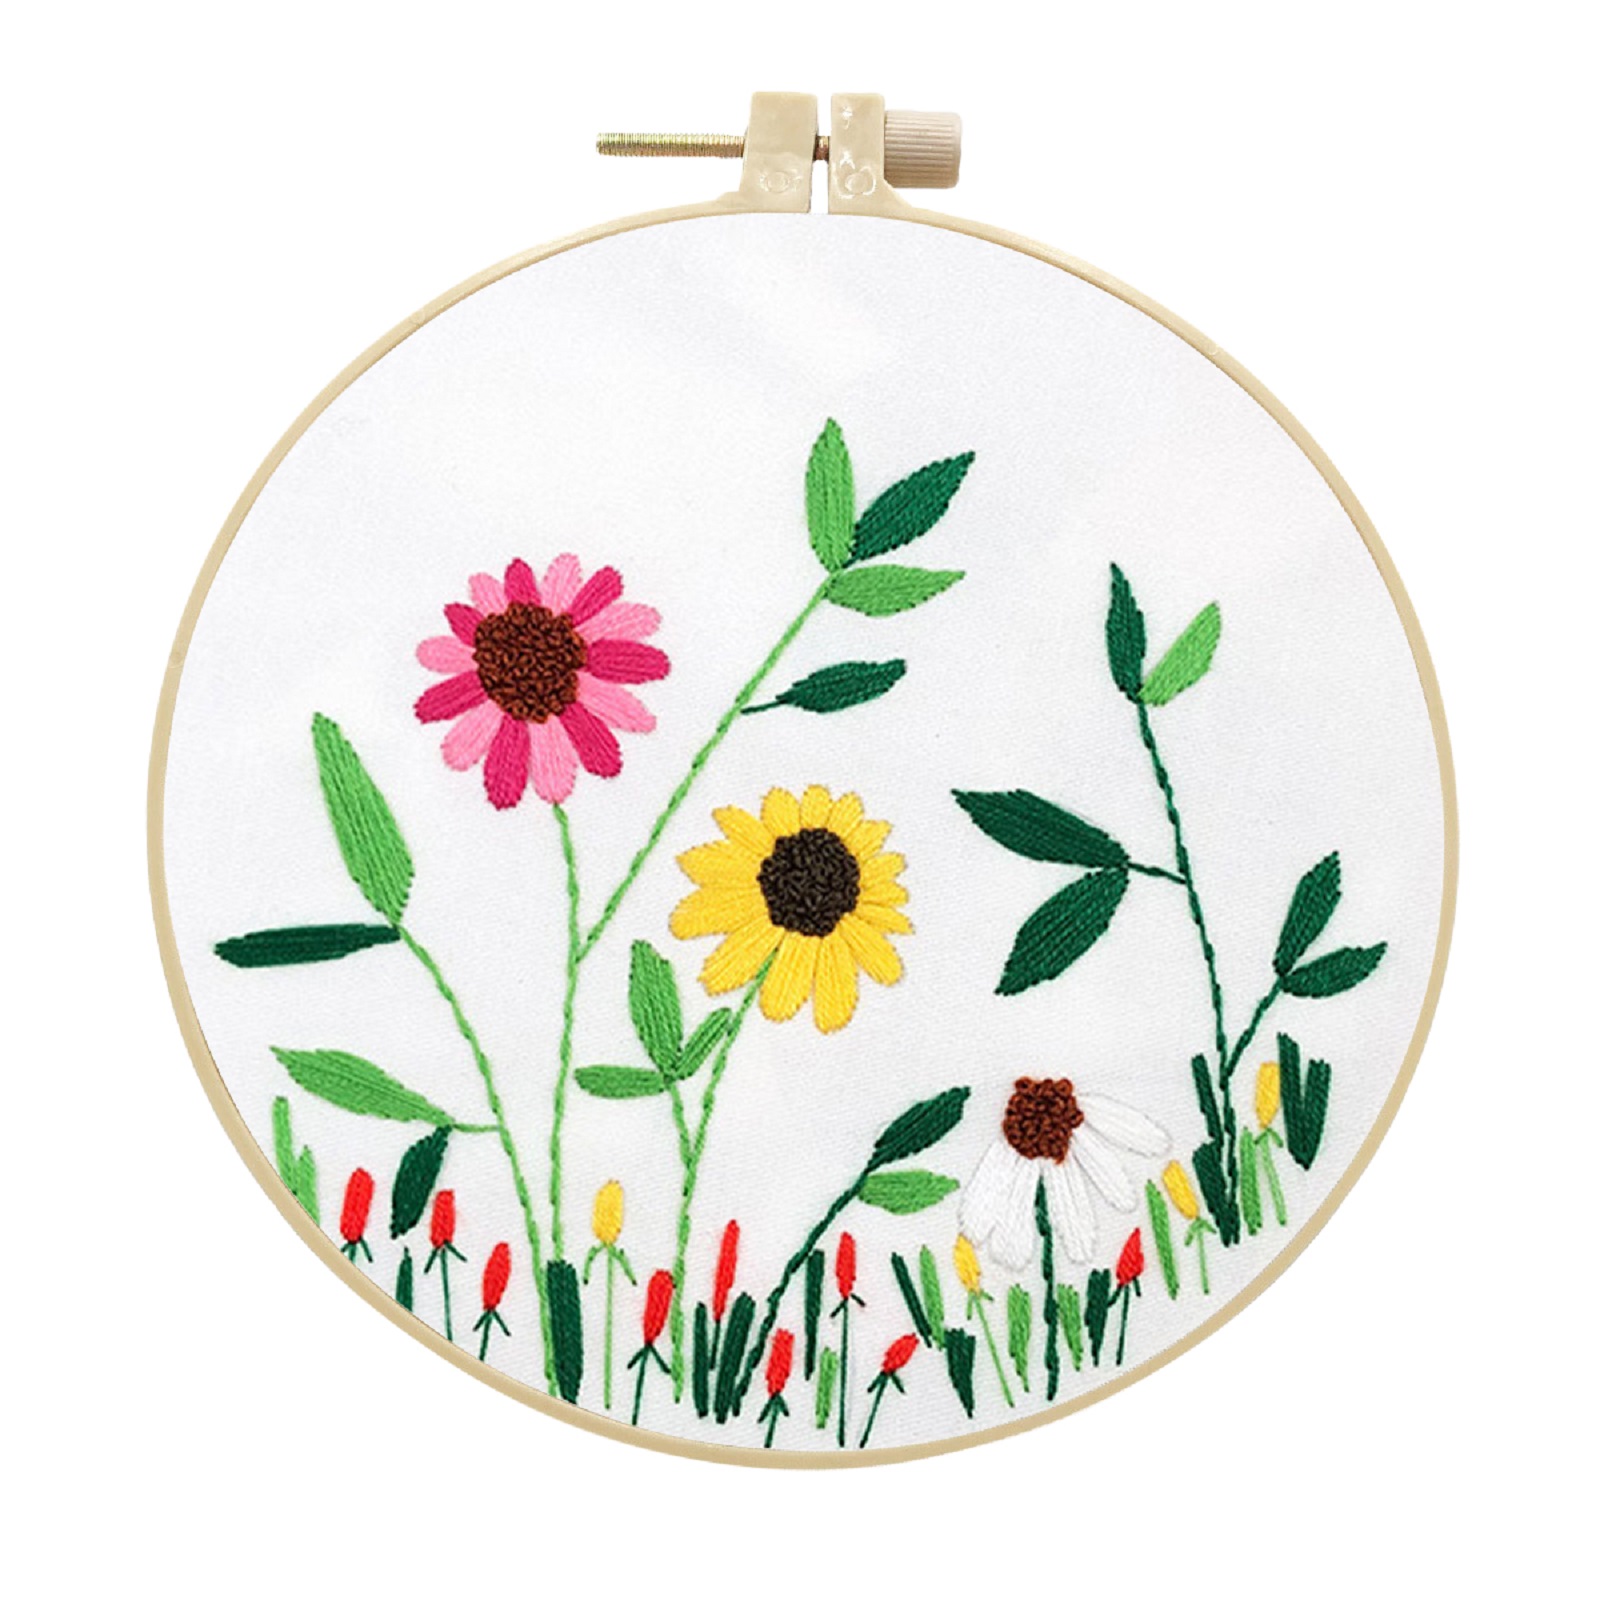 Embroidery Kits Cross stitch kits for Adult Beginner - Small Wild Flowers Pattern